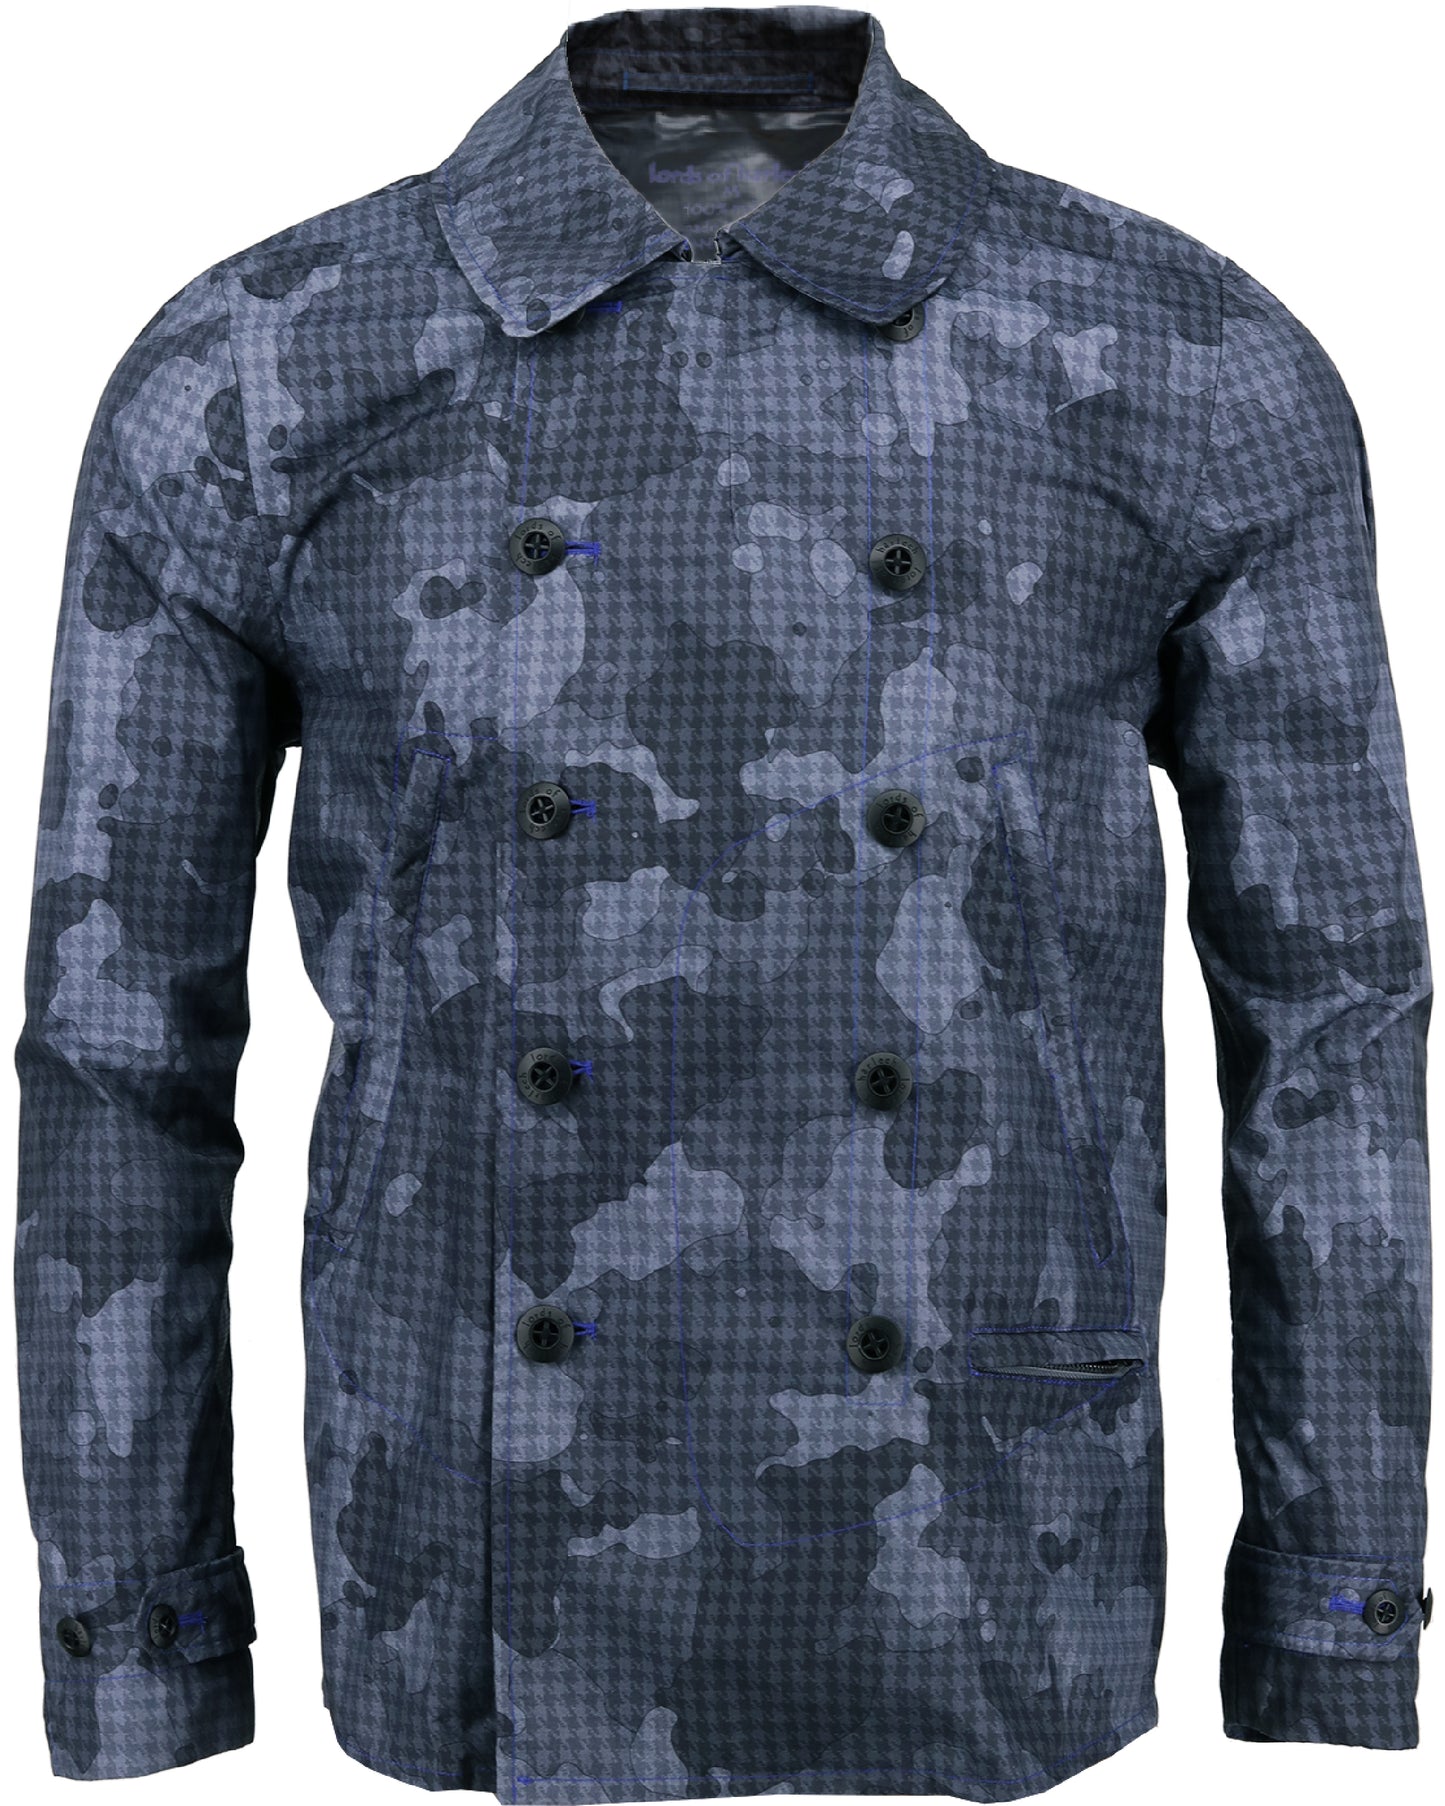 Fritz Houndstooth Charcoal Camo Military Jacket